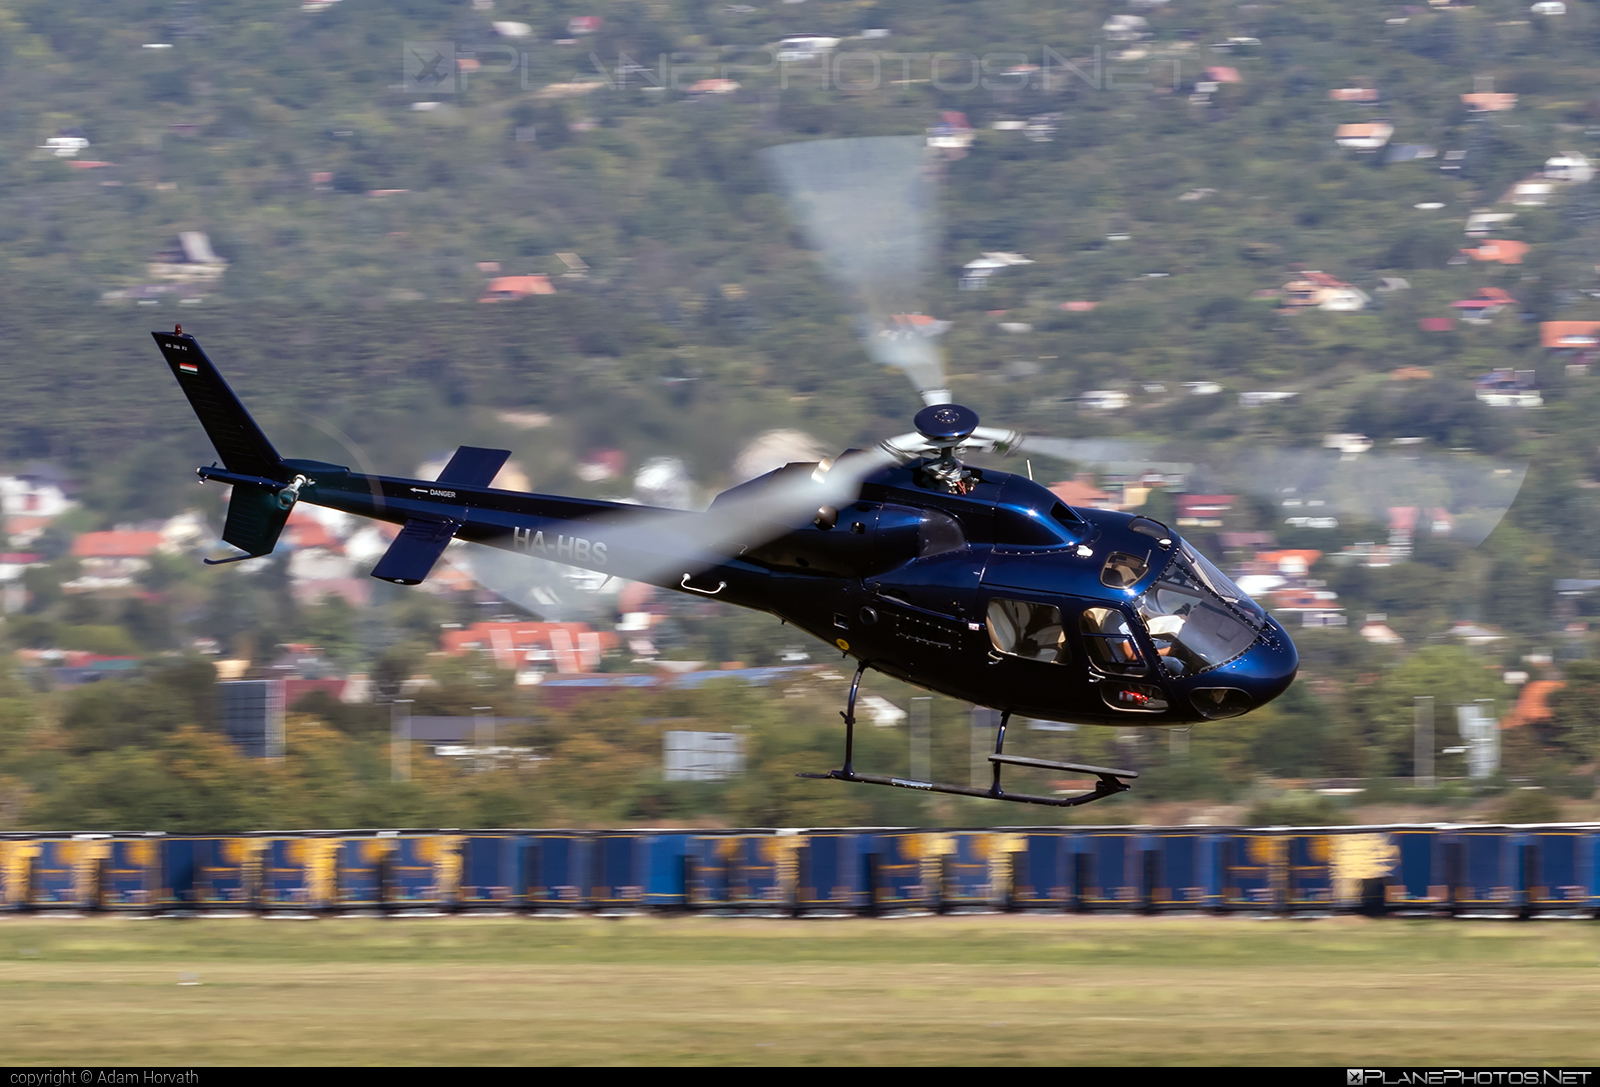 Aerospatiale AS355 F2 Ecureuil 2 - HA-HBS operated by Fly-Coop #aerospatiale #aerospatialeecureuil #as355 #as355ecureuil2 #as355f2 #as355f2ecureuil2 #ecureuil2 #flycoop